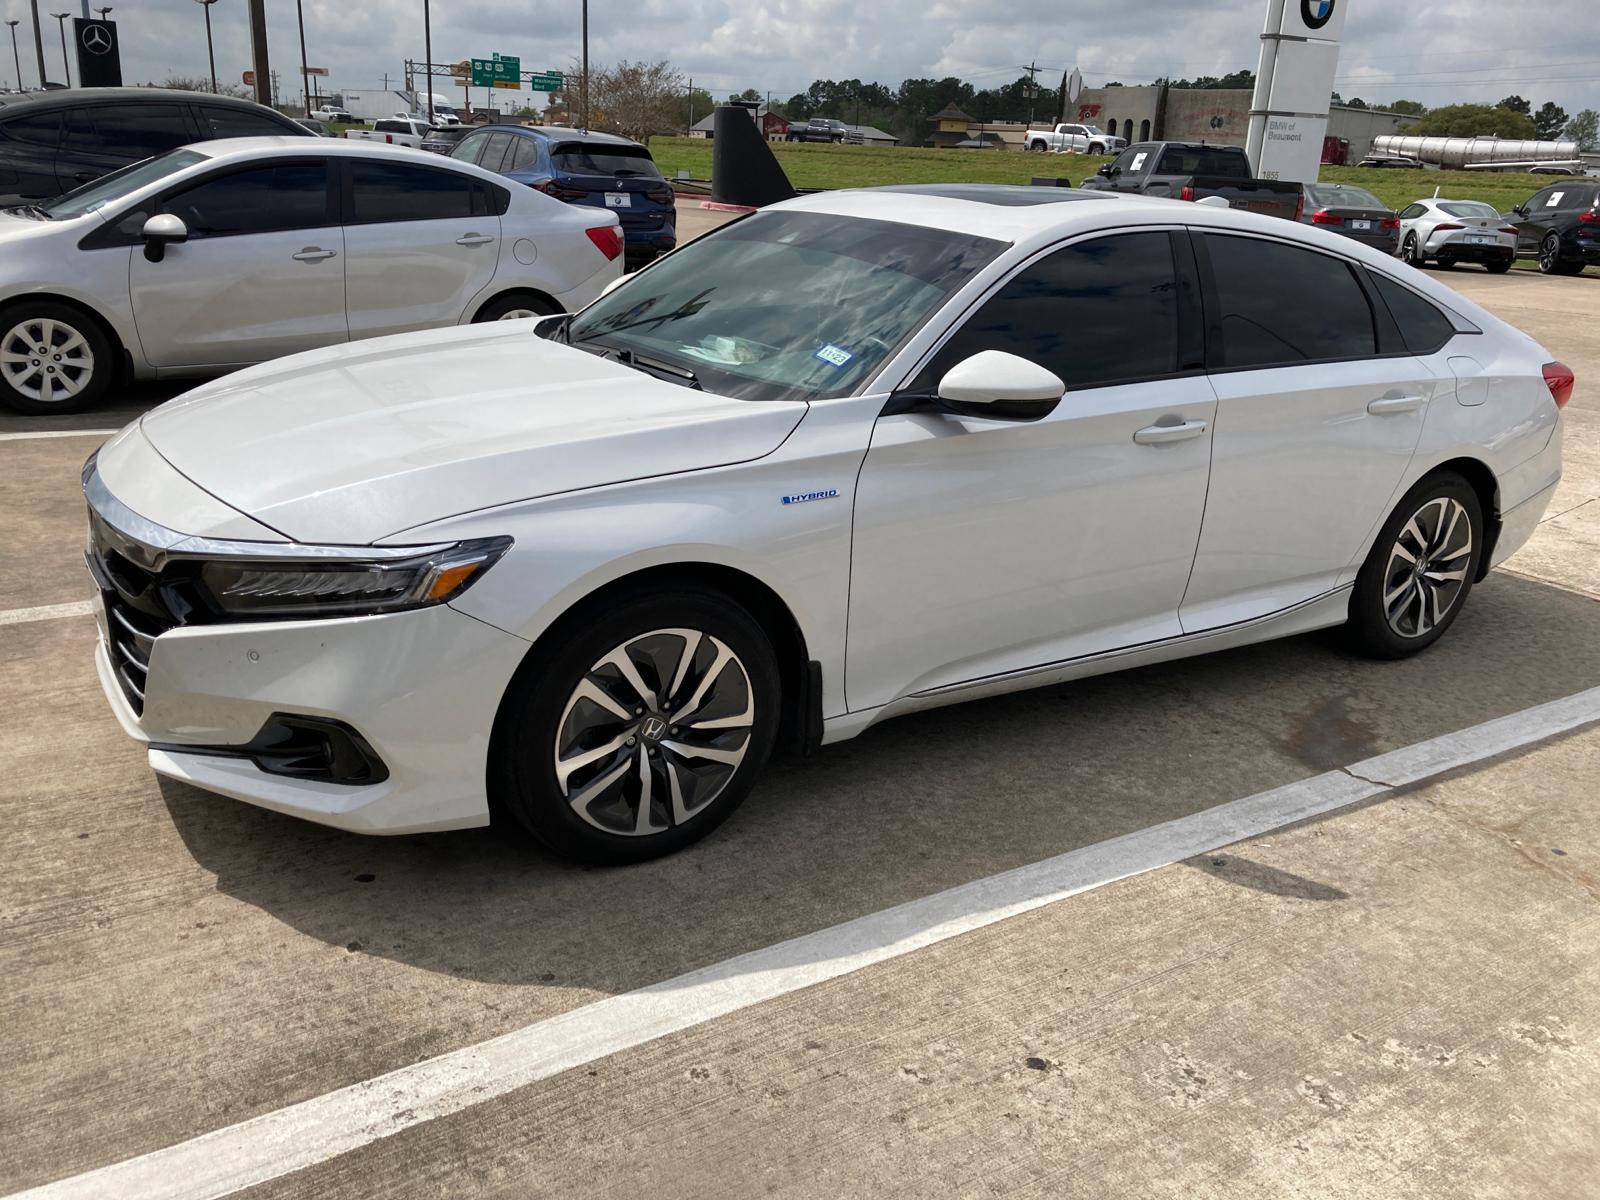 Pre-Owned 2022 Honda Accord Hybrid EX-L Sedan 4dr Car in Beaumont #NA000713  | BMW of Beaumont